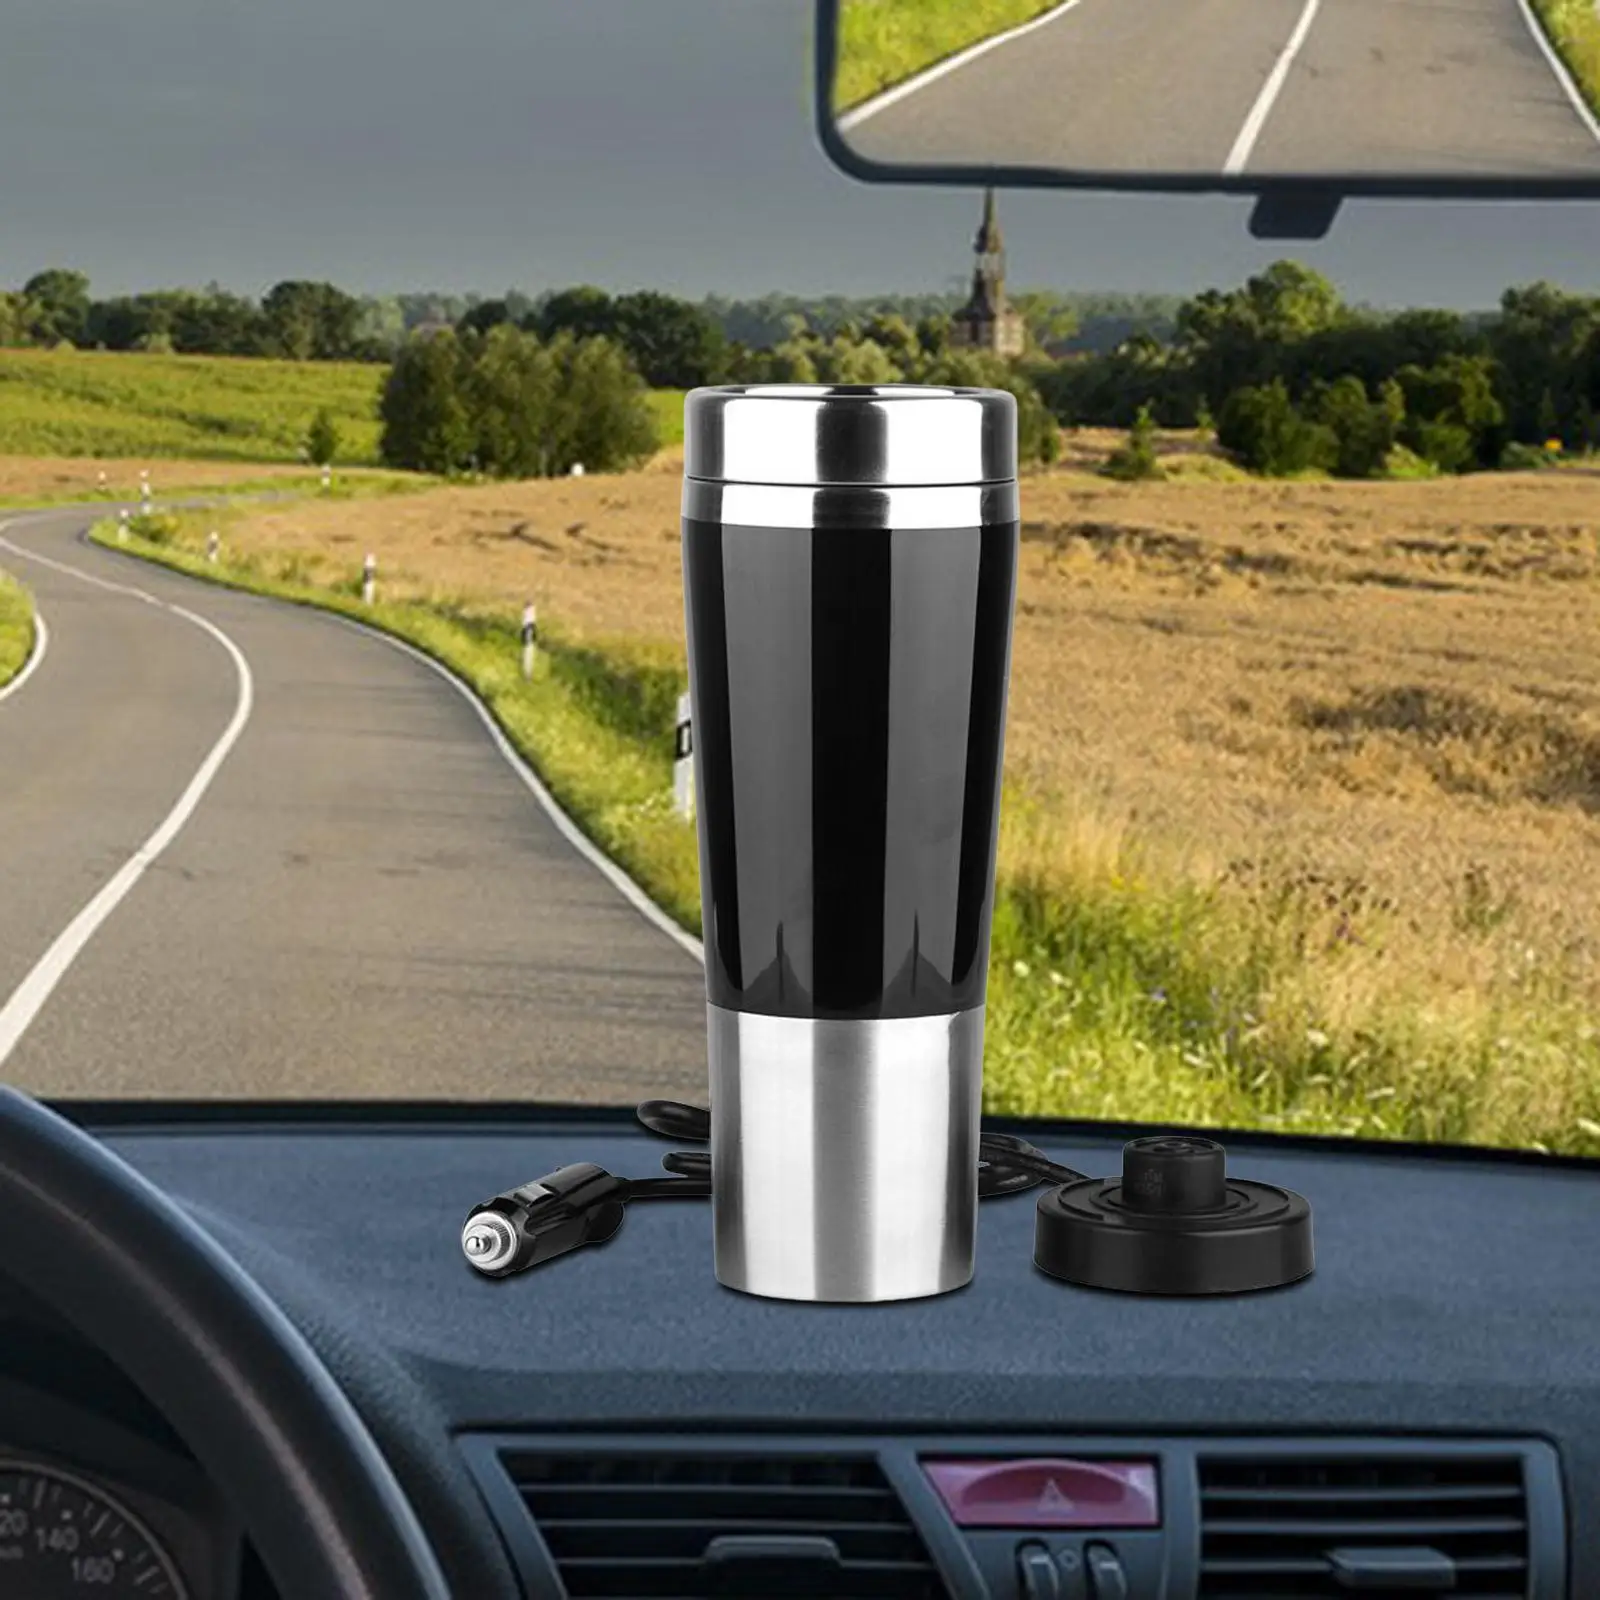 Electric 12V Car Kettle Boiler Heating Warmer Hot Water Kettle Mug Heated Water Boiler for Tea Coffee Outdoor Camping